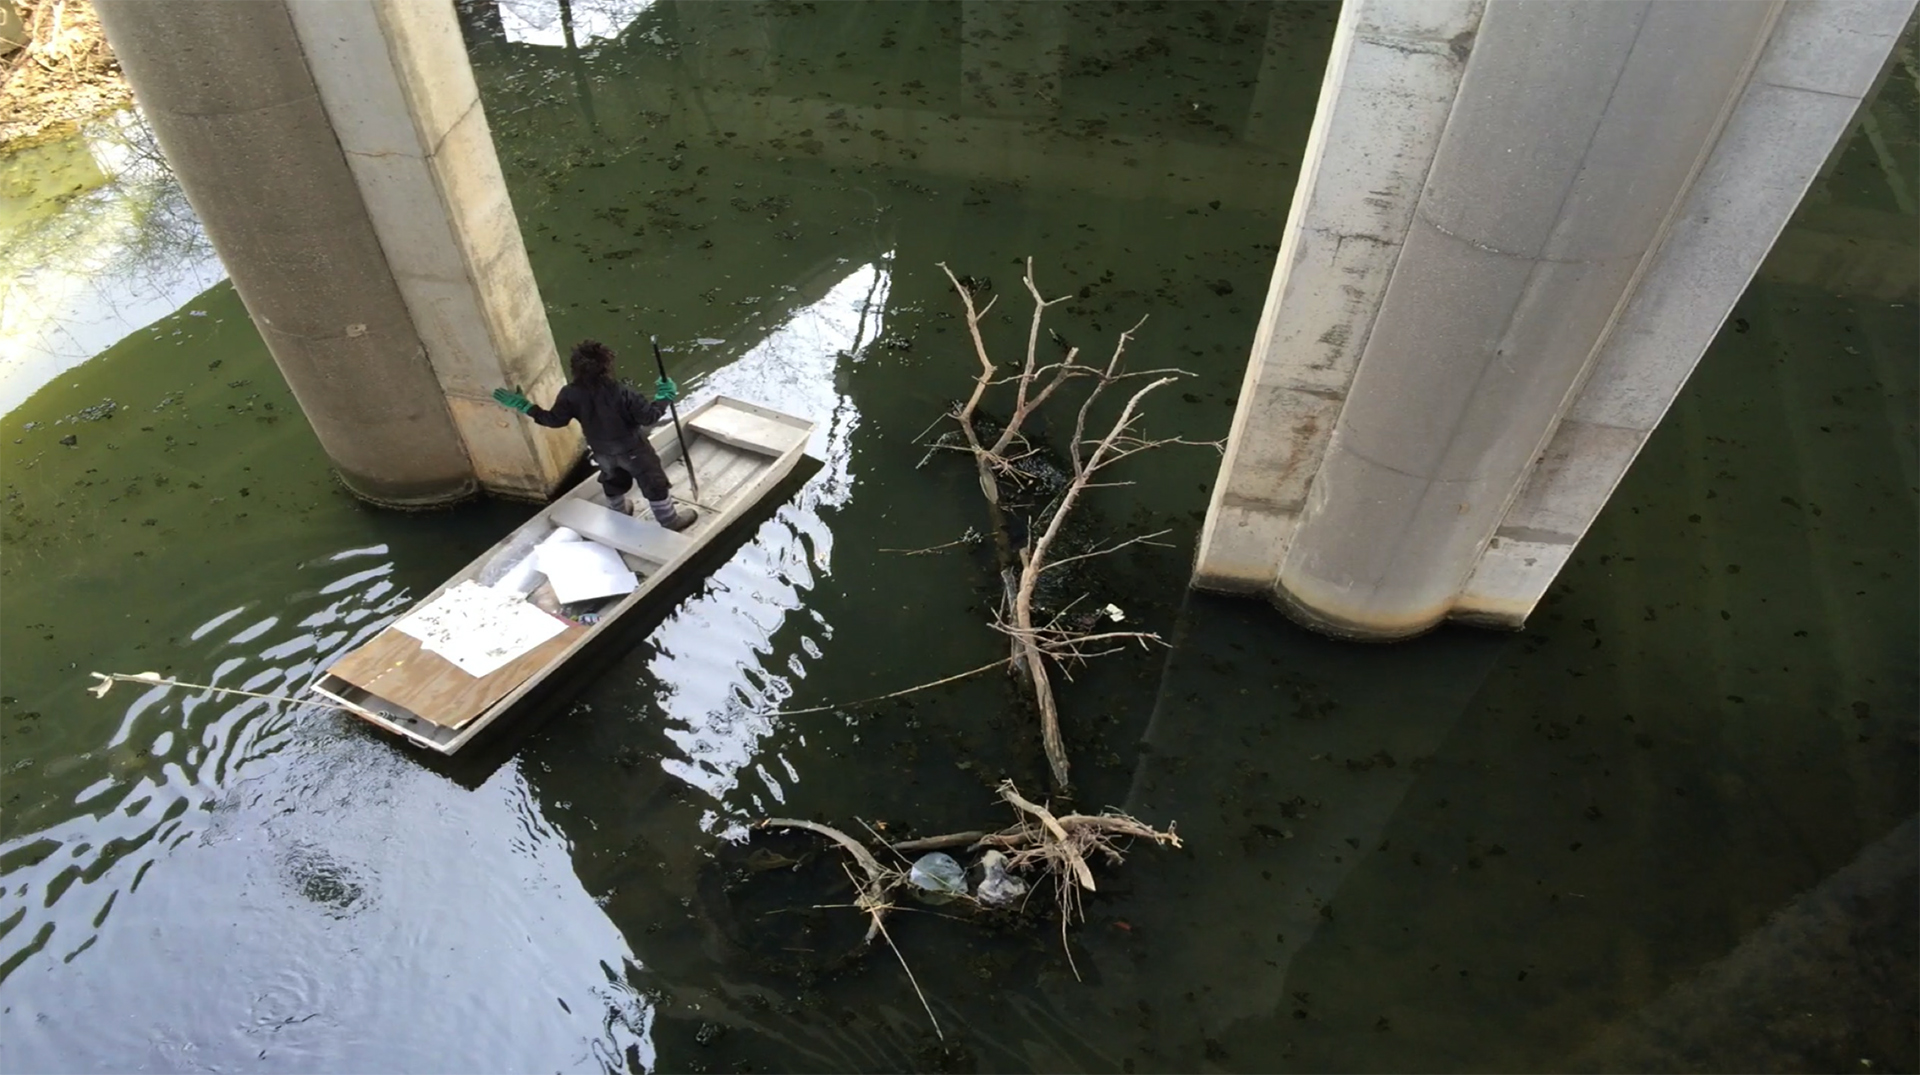 The artist floats on a small boat beneath a bridge on Flushing Creek in Queens, NY